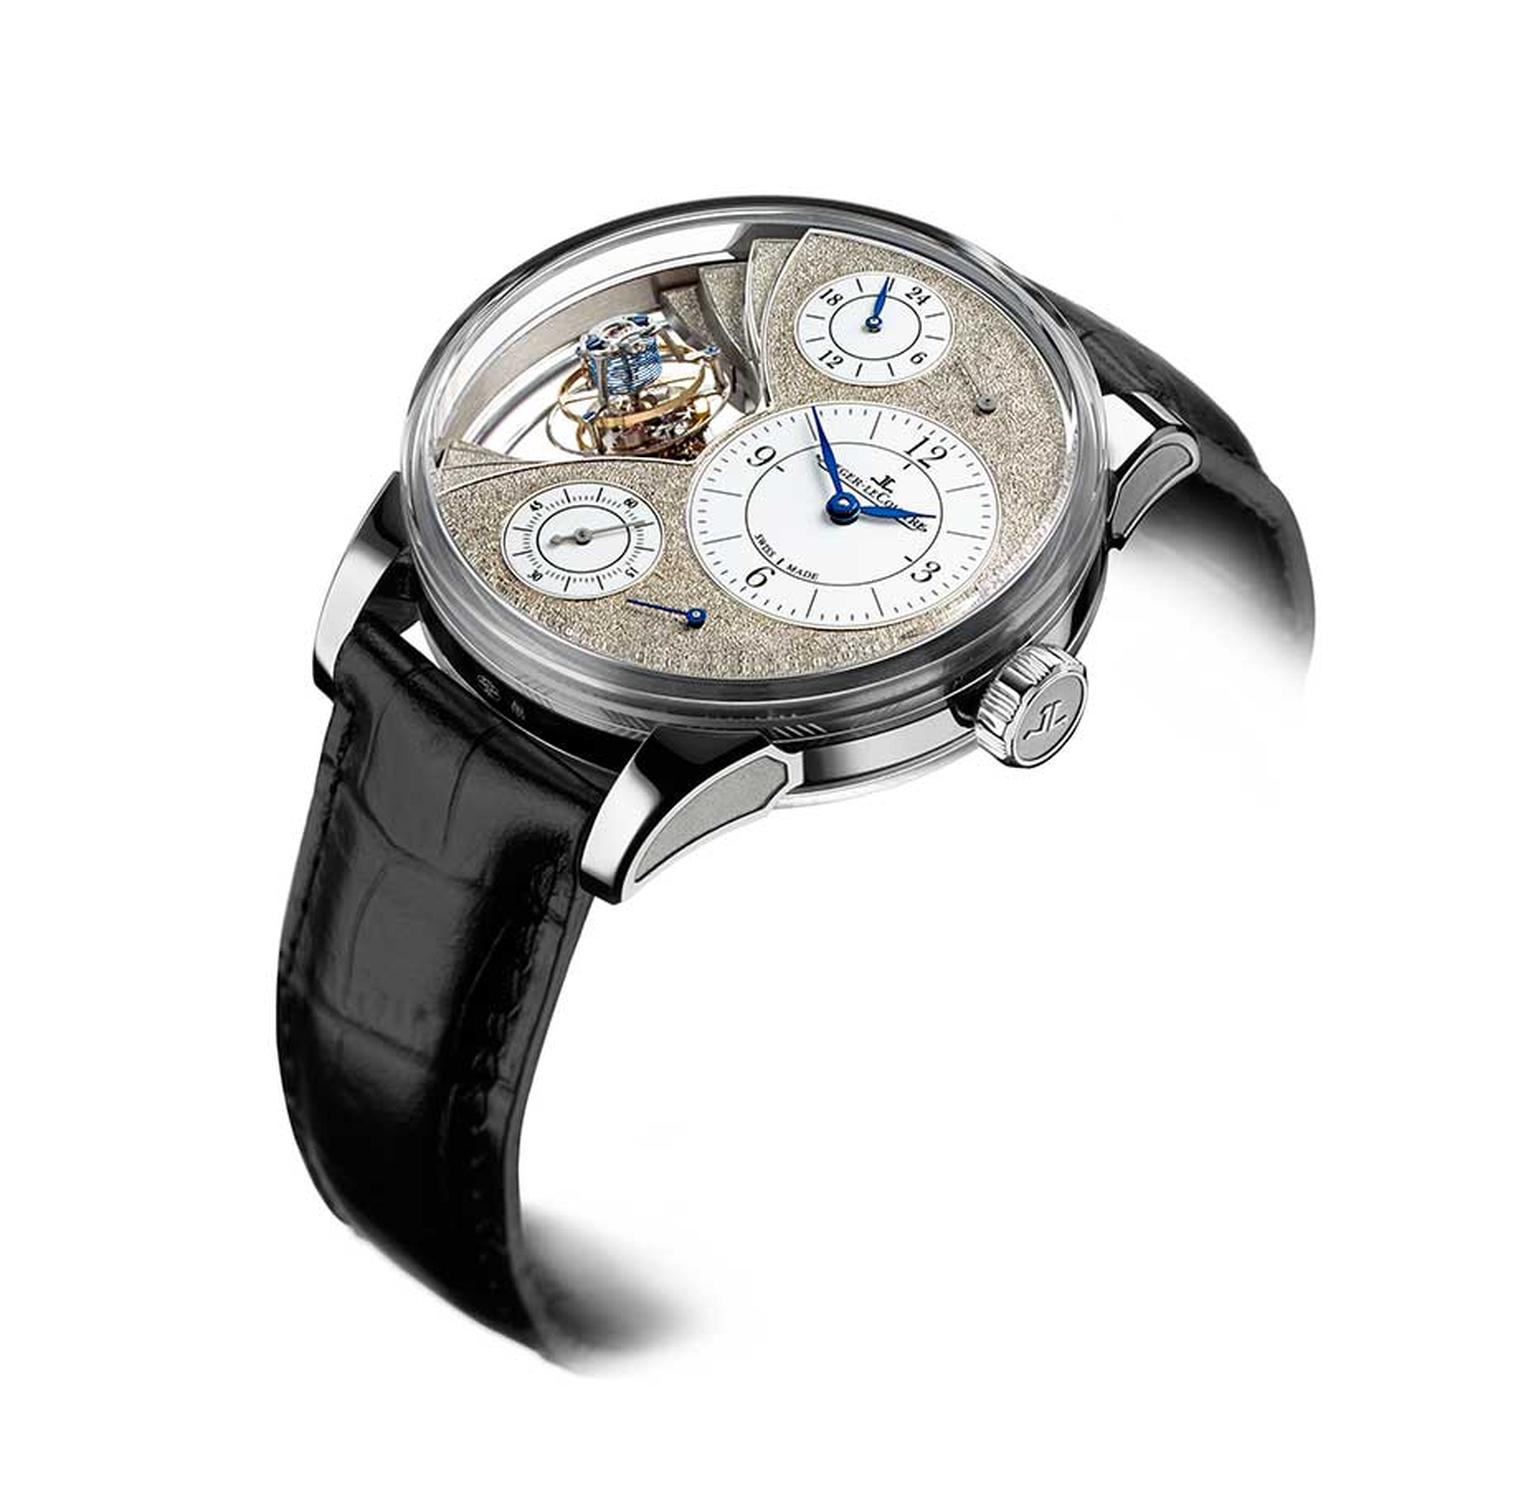 Jaeger-LeCoultre Hybris Artistica collection is a limited edition of just 12 watches.